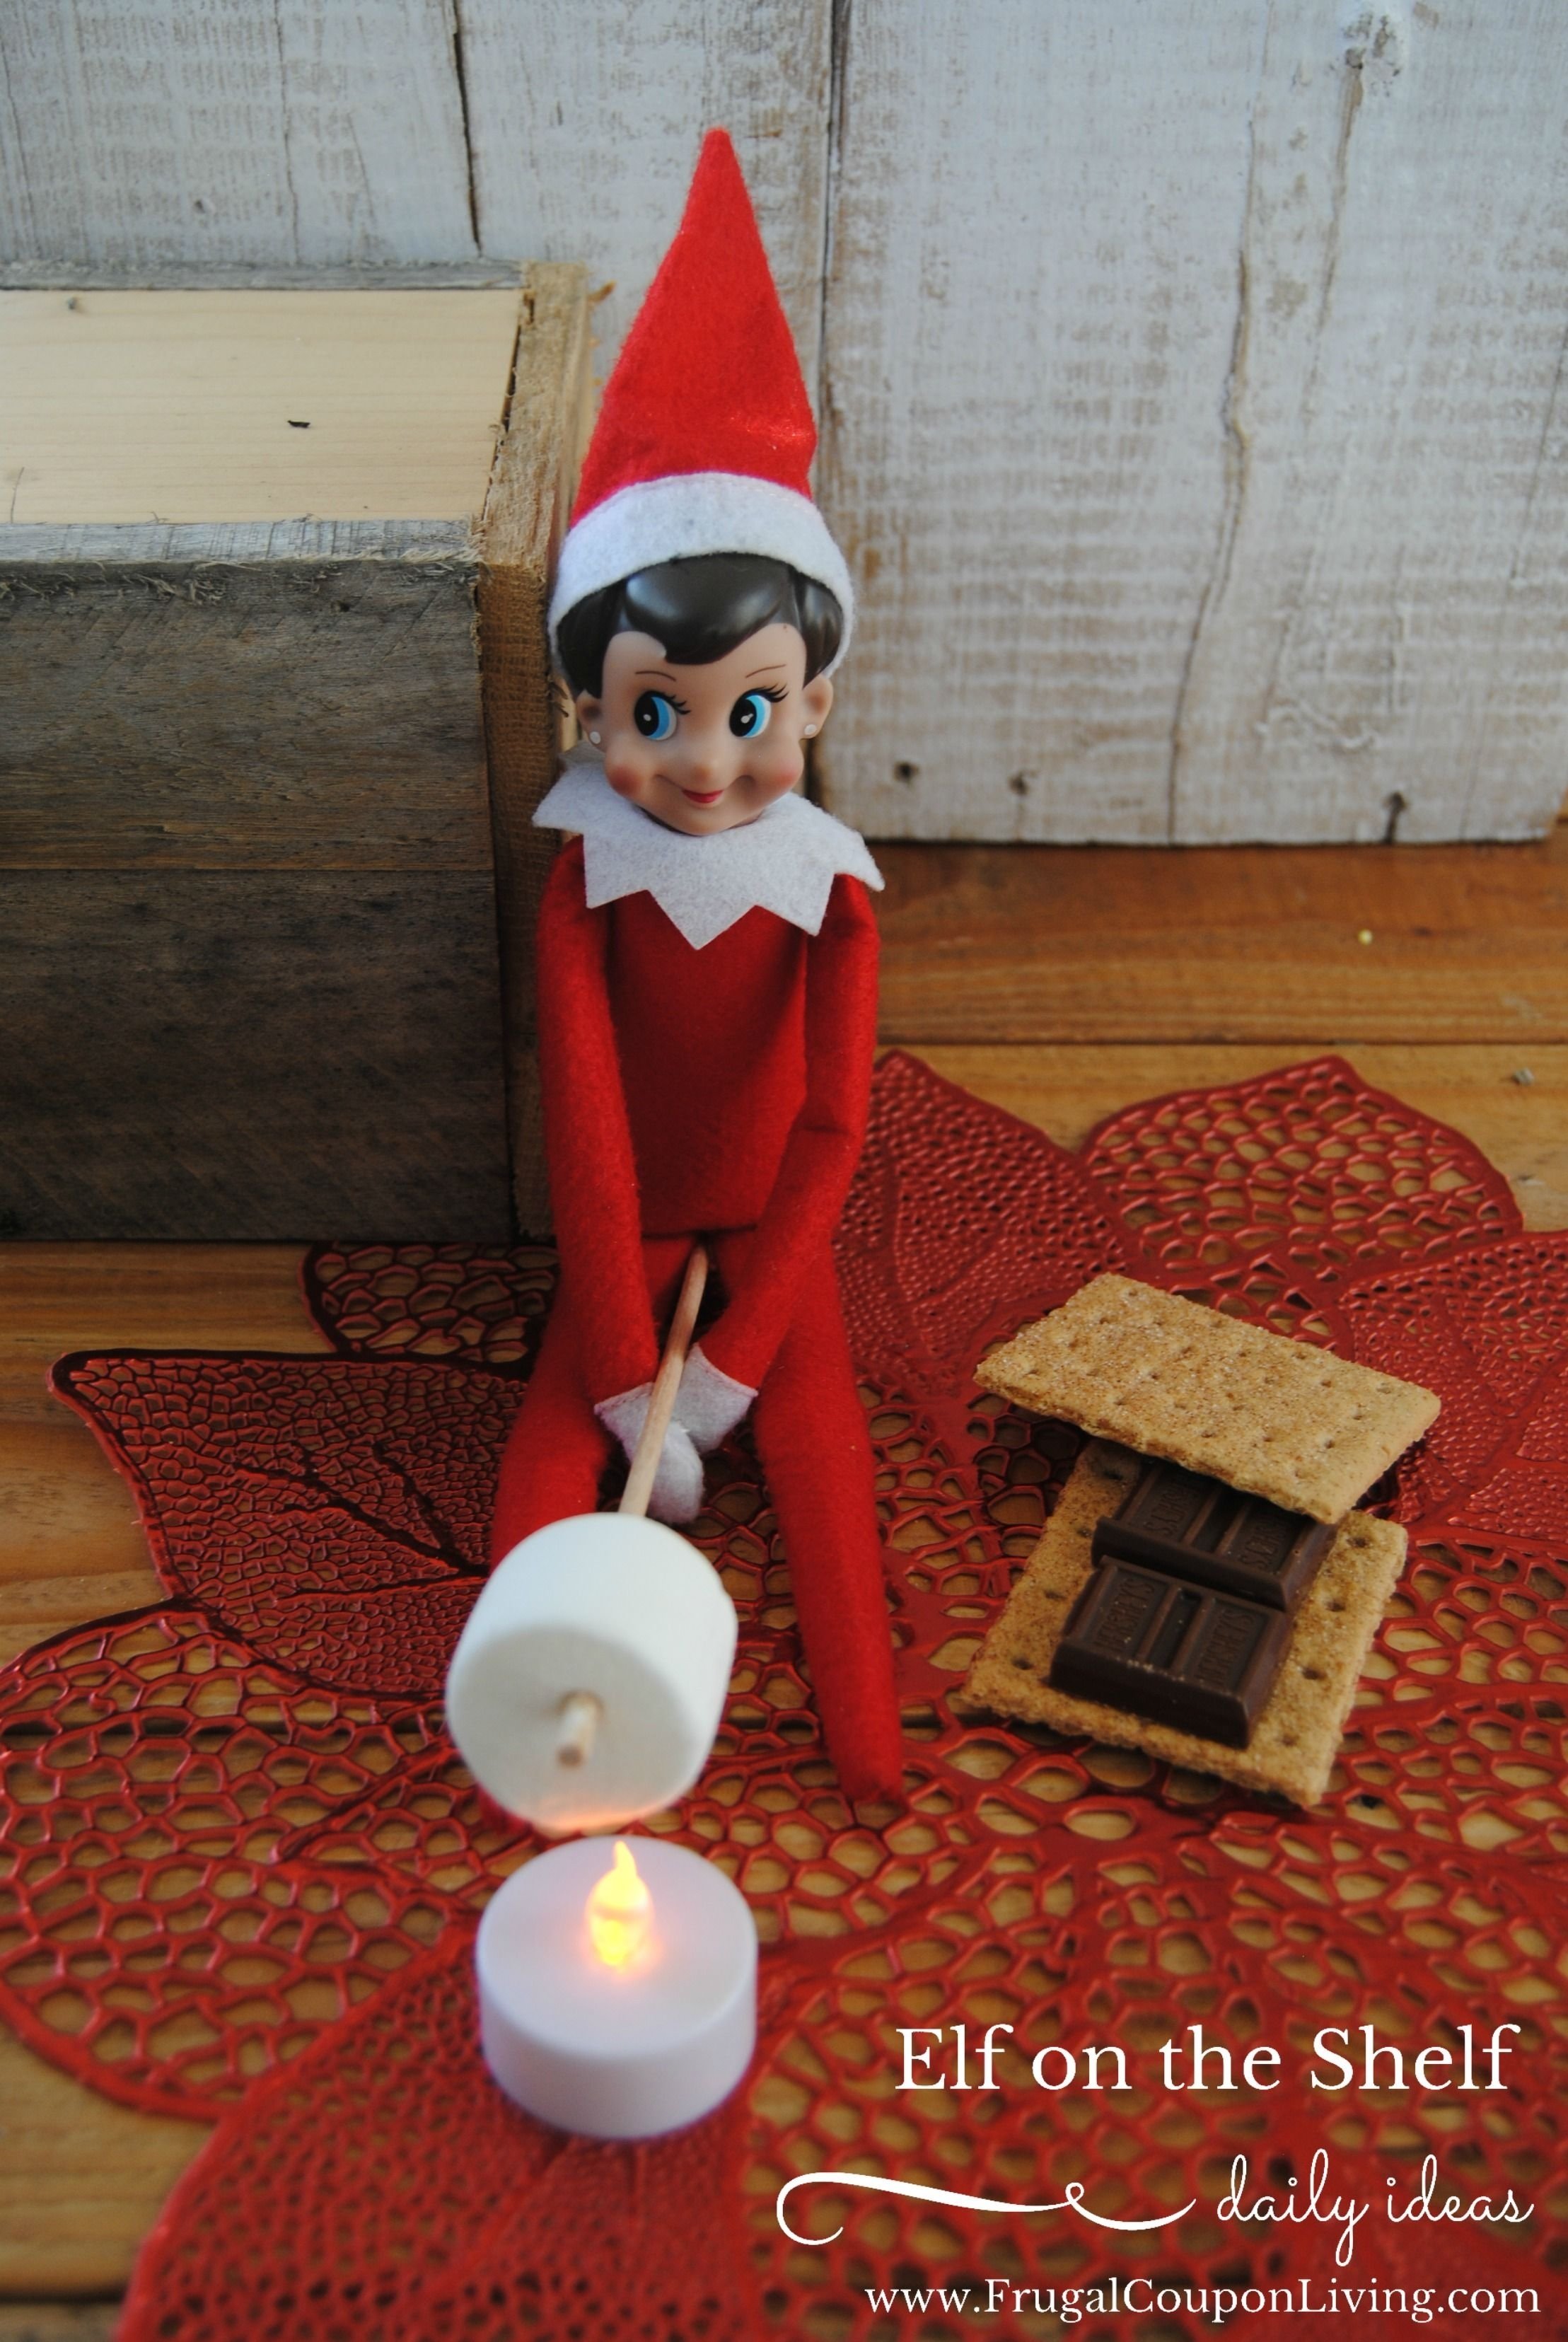 The Complete Index Of Elf On The Shelf Ideas Elf Elf On The Shelf | My ...